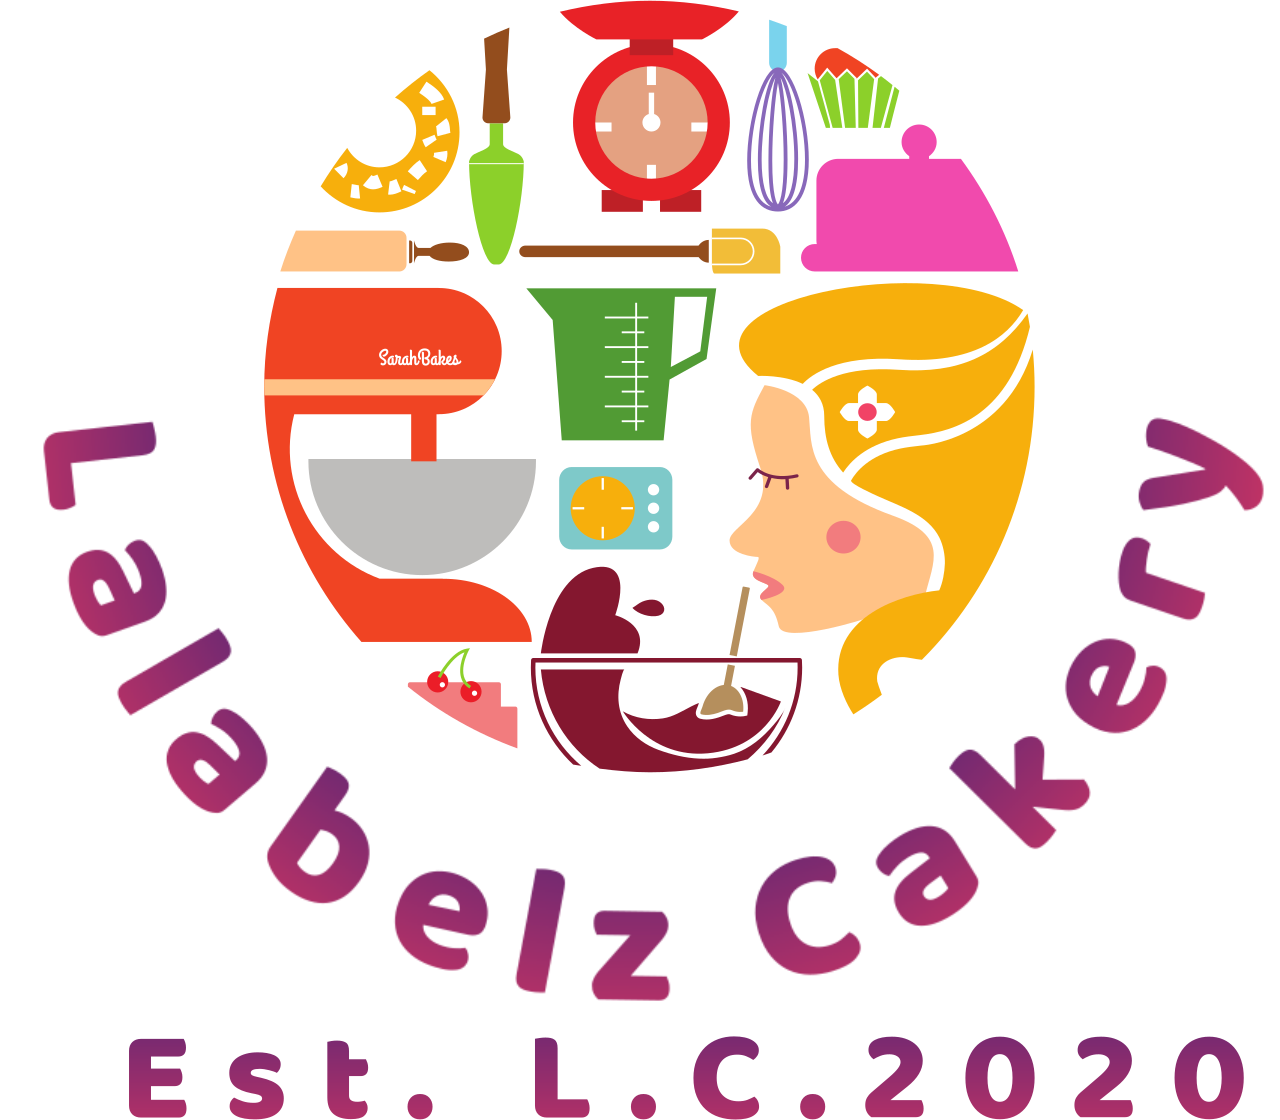 Lalabelz Cakery's web page